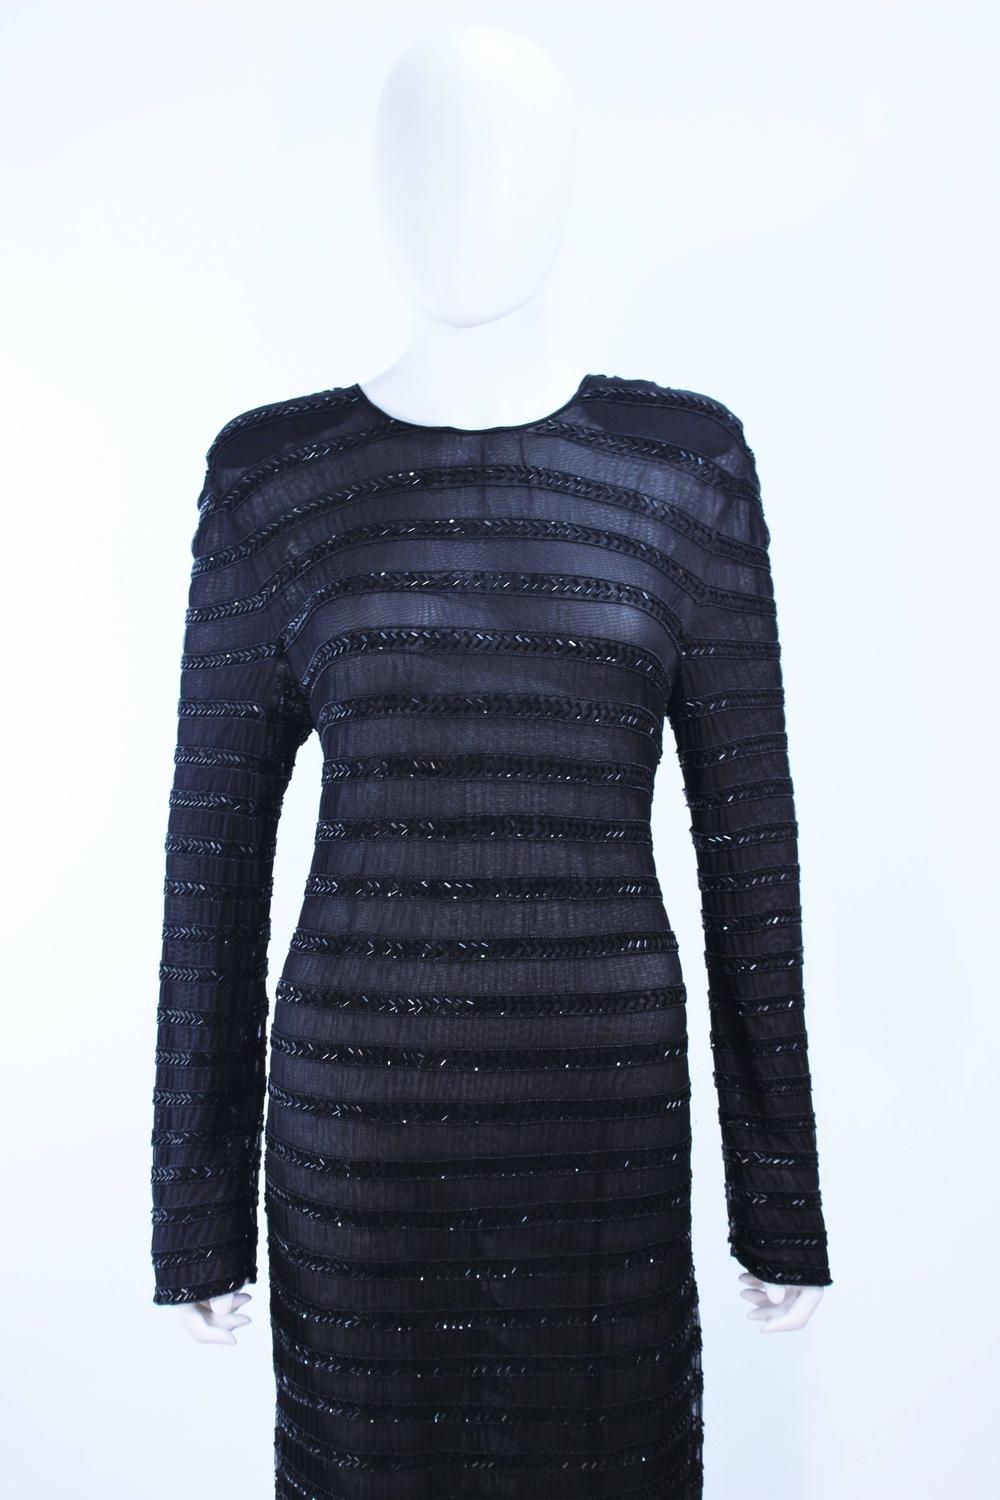 GIORGIO ARMANI Black Beaded Sheer Mesh Gown Size 42 For Sale at 1stdibs